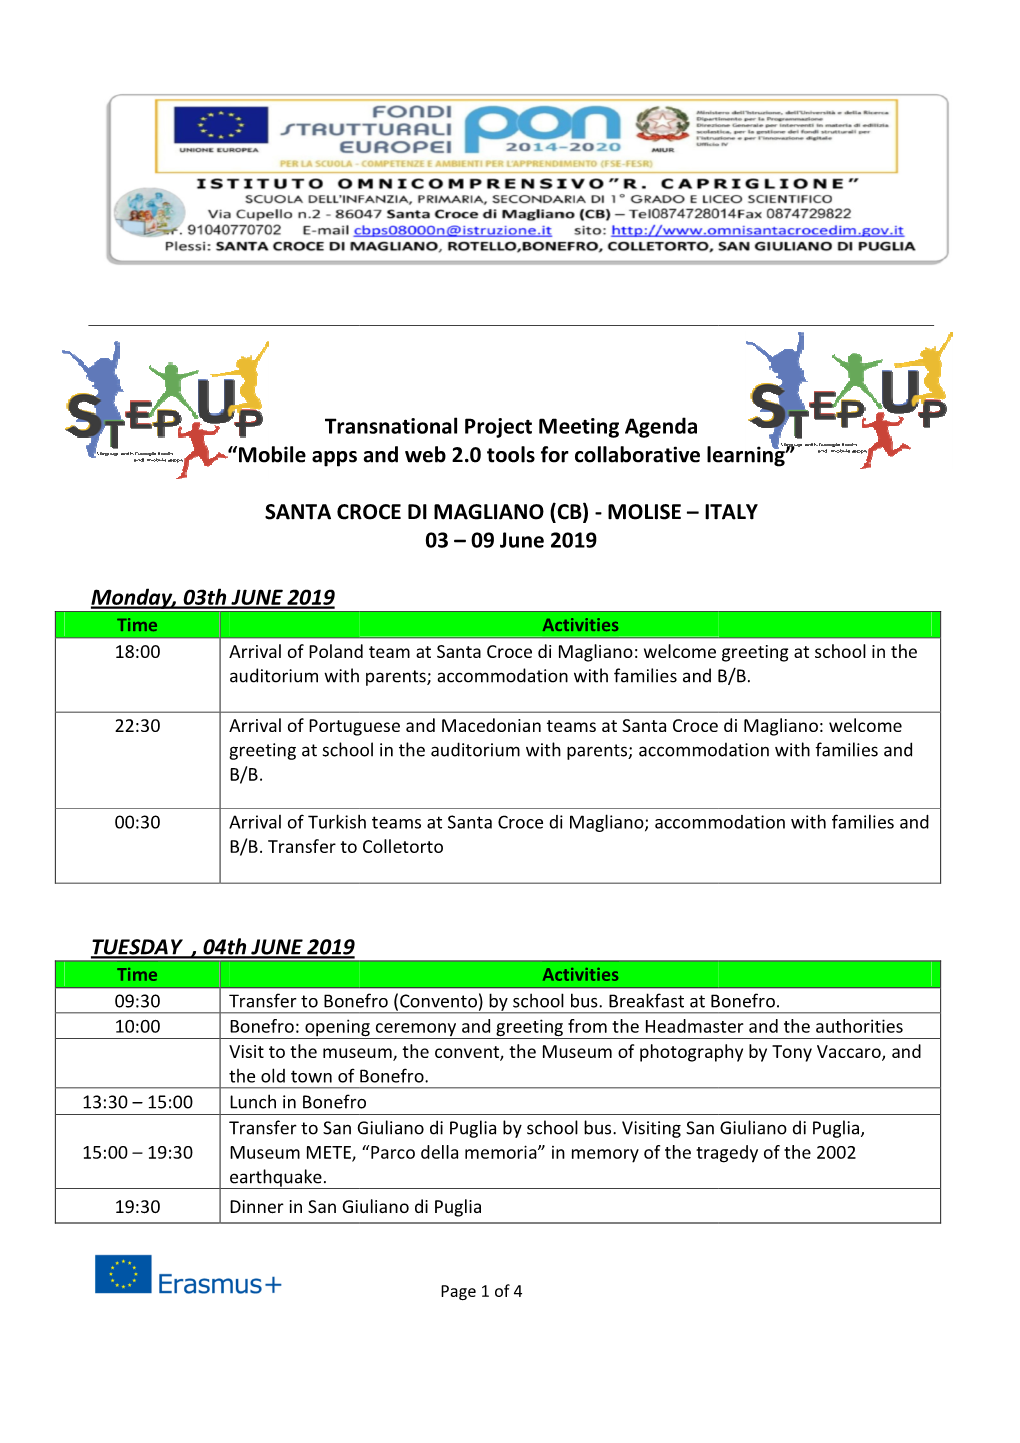 Transnational Project Meeting Agenda “Mobile Apps and Web 2.0 Tools for Collaborative Learning”